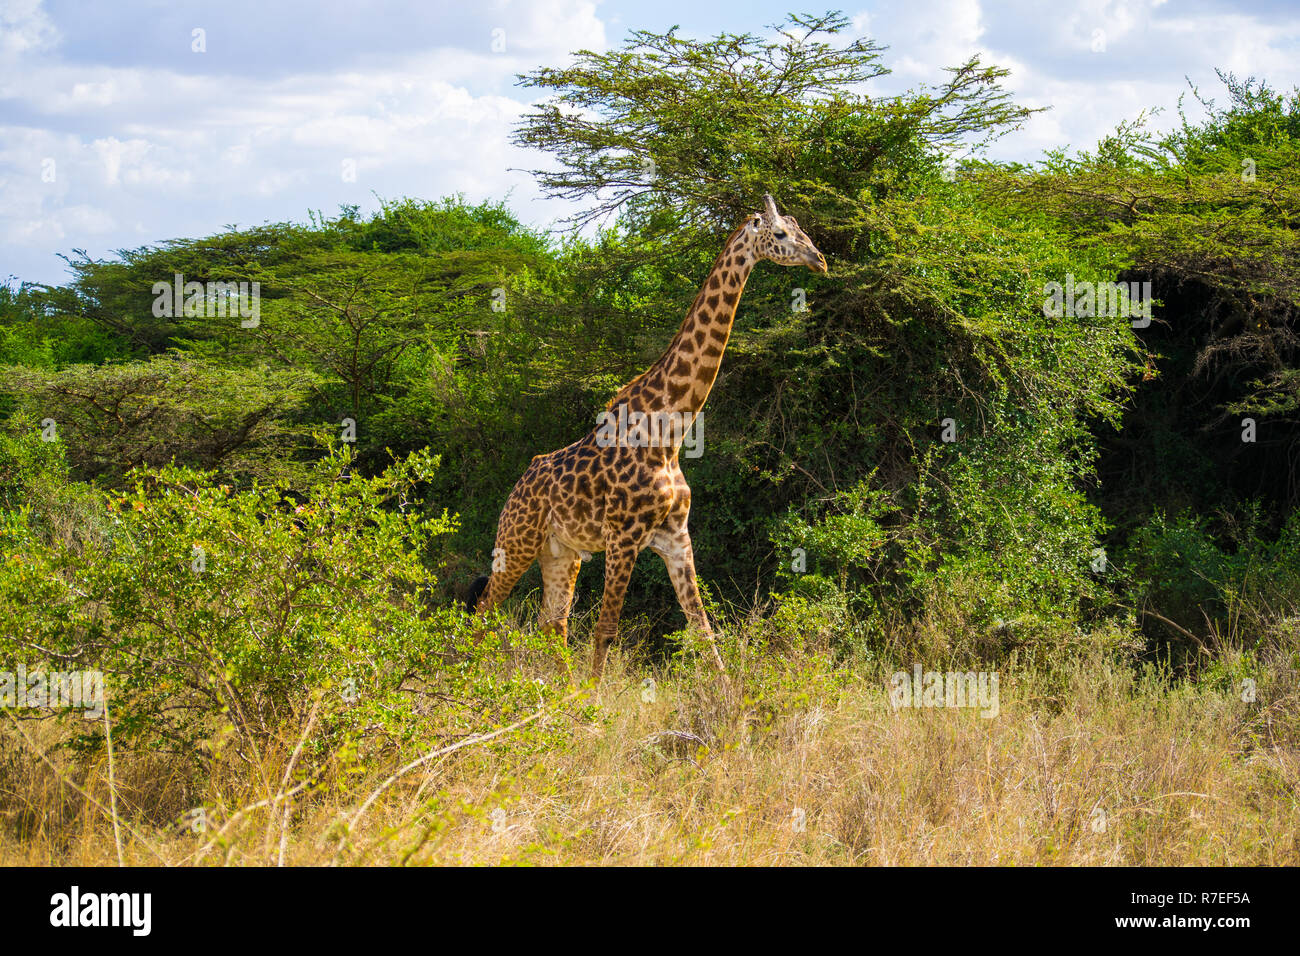 Giraffes in Nairobi National park with skyscrapers as background Stock Photo